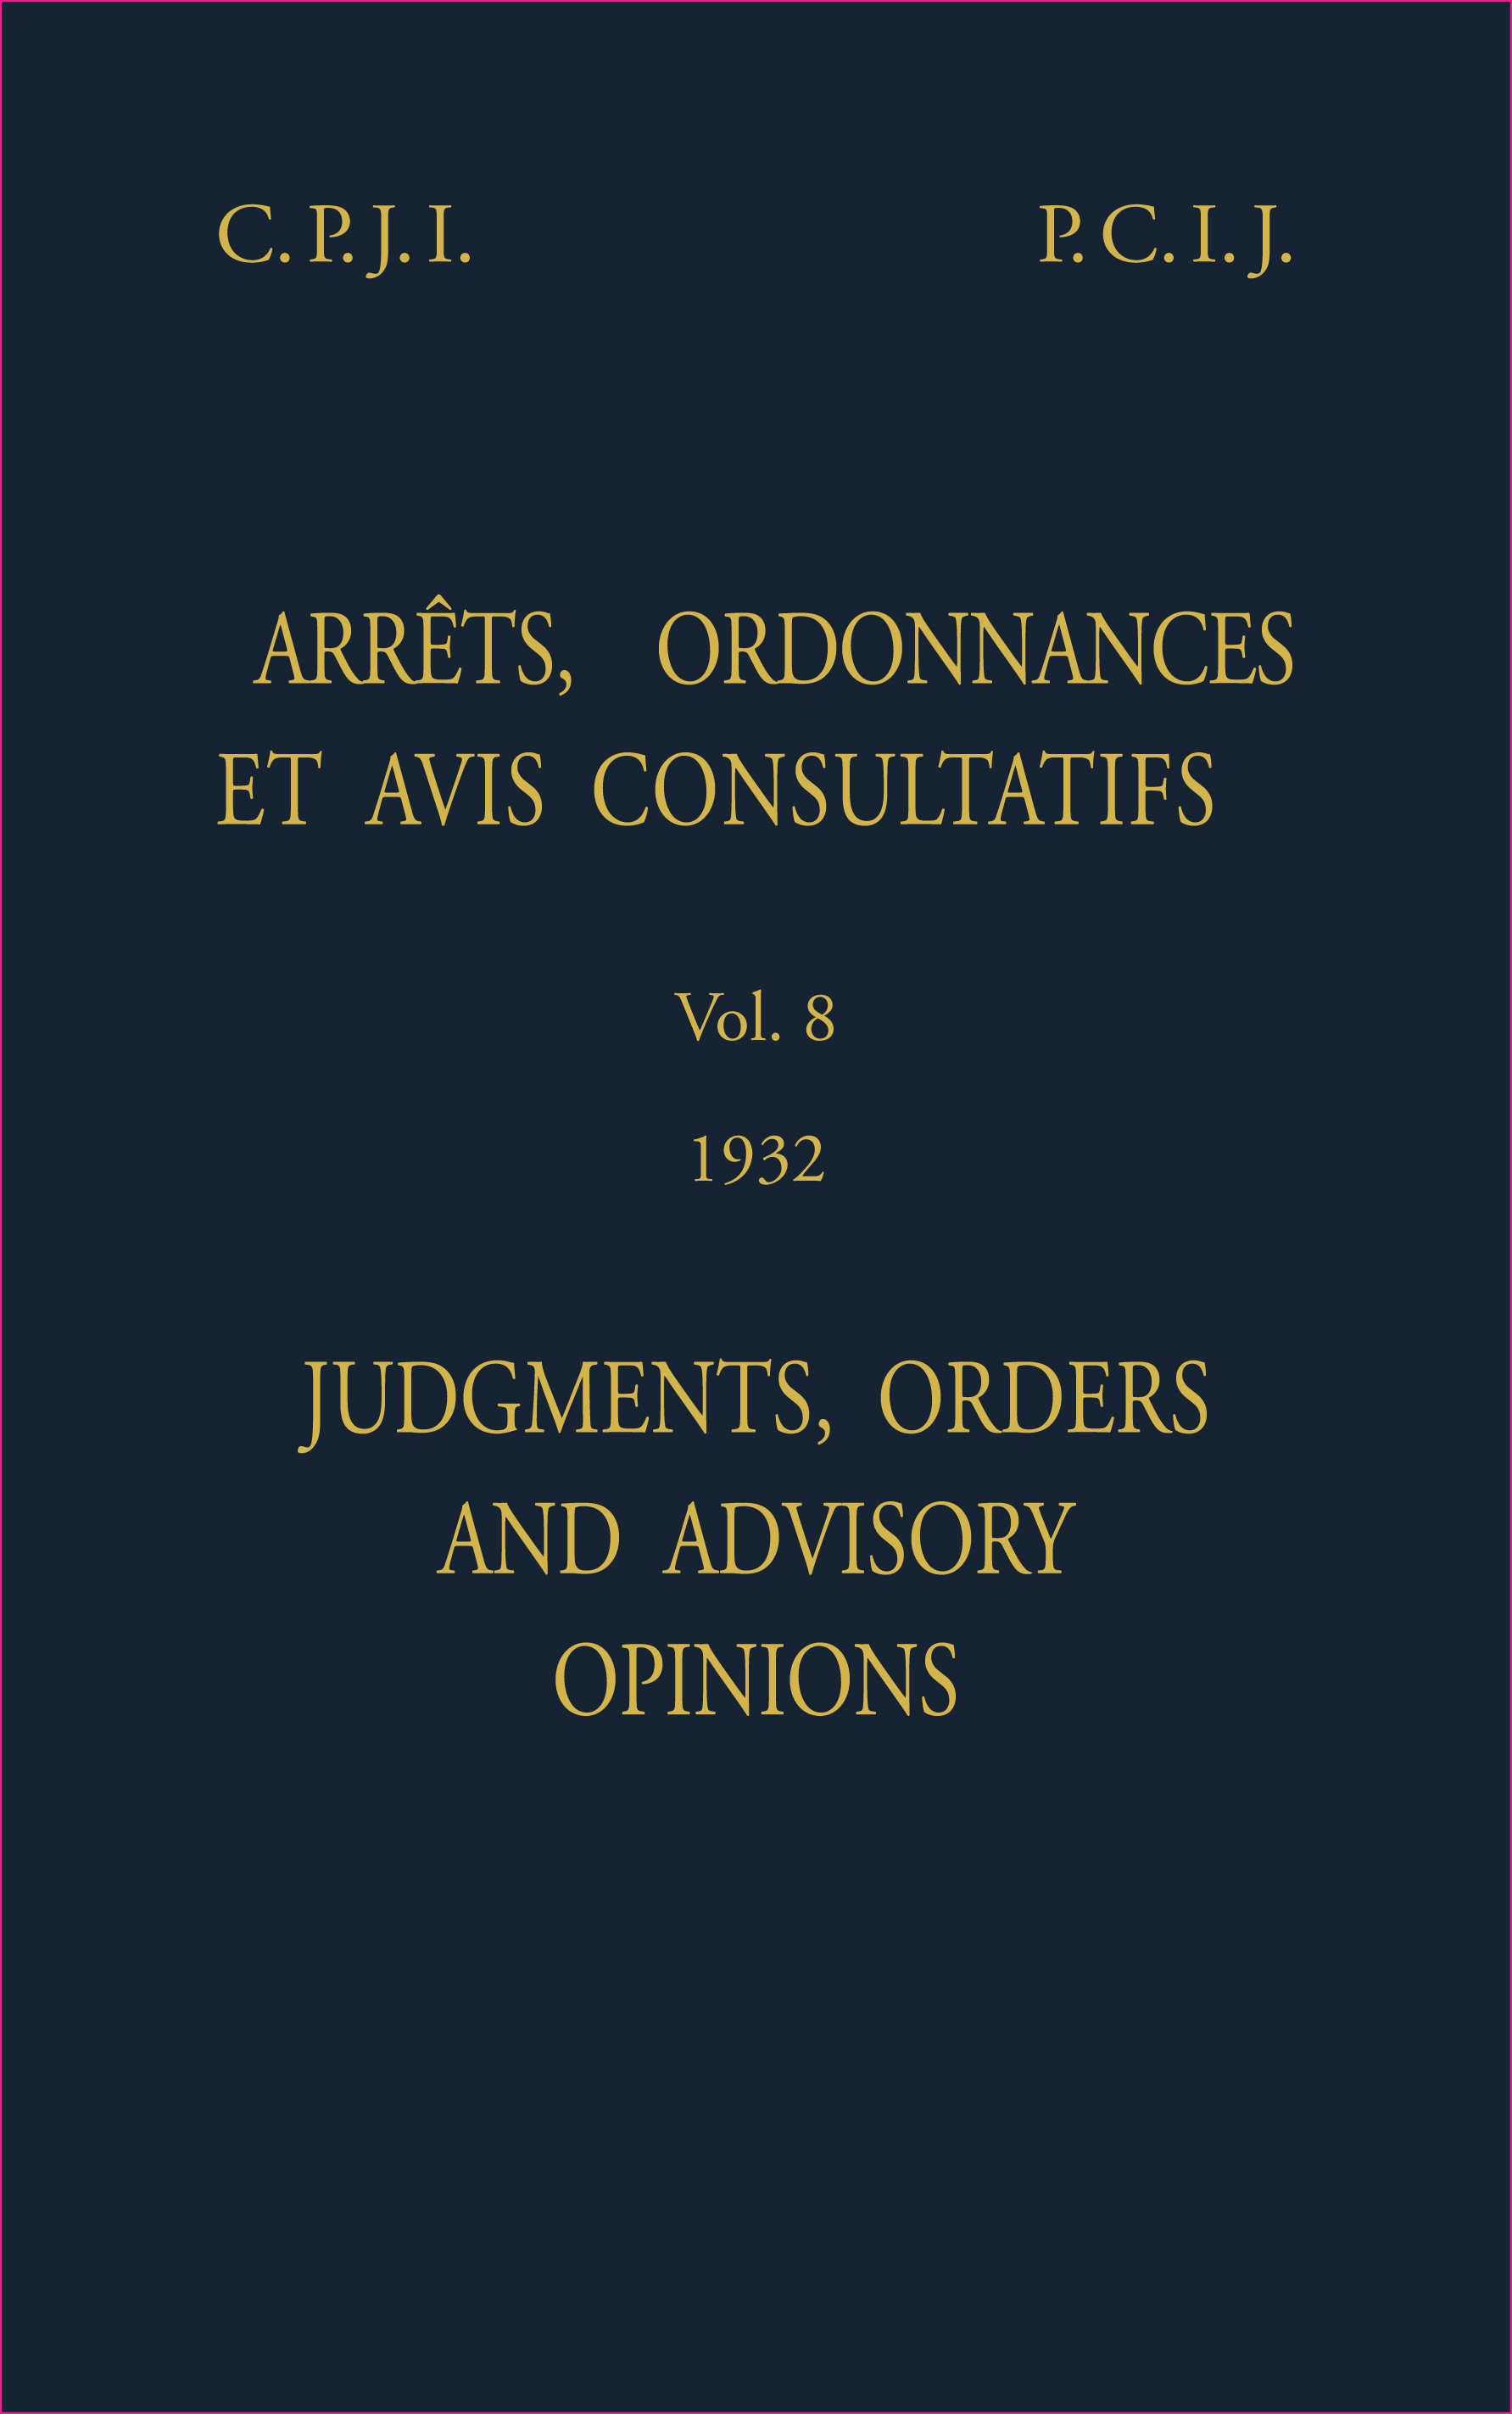 image of Judgments, Orders and Advisory Opinions: Vol 8, 1932